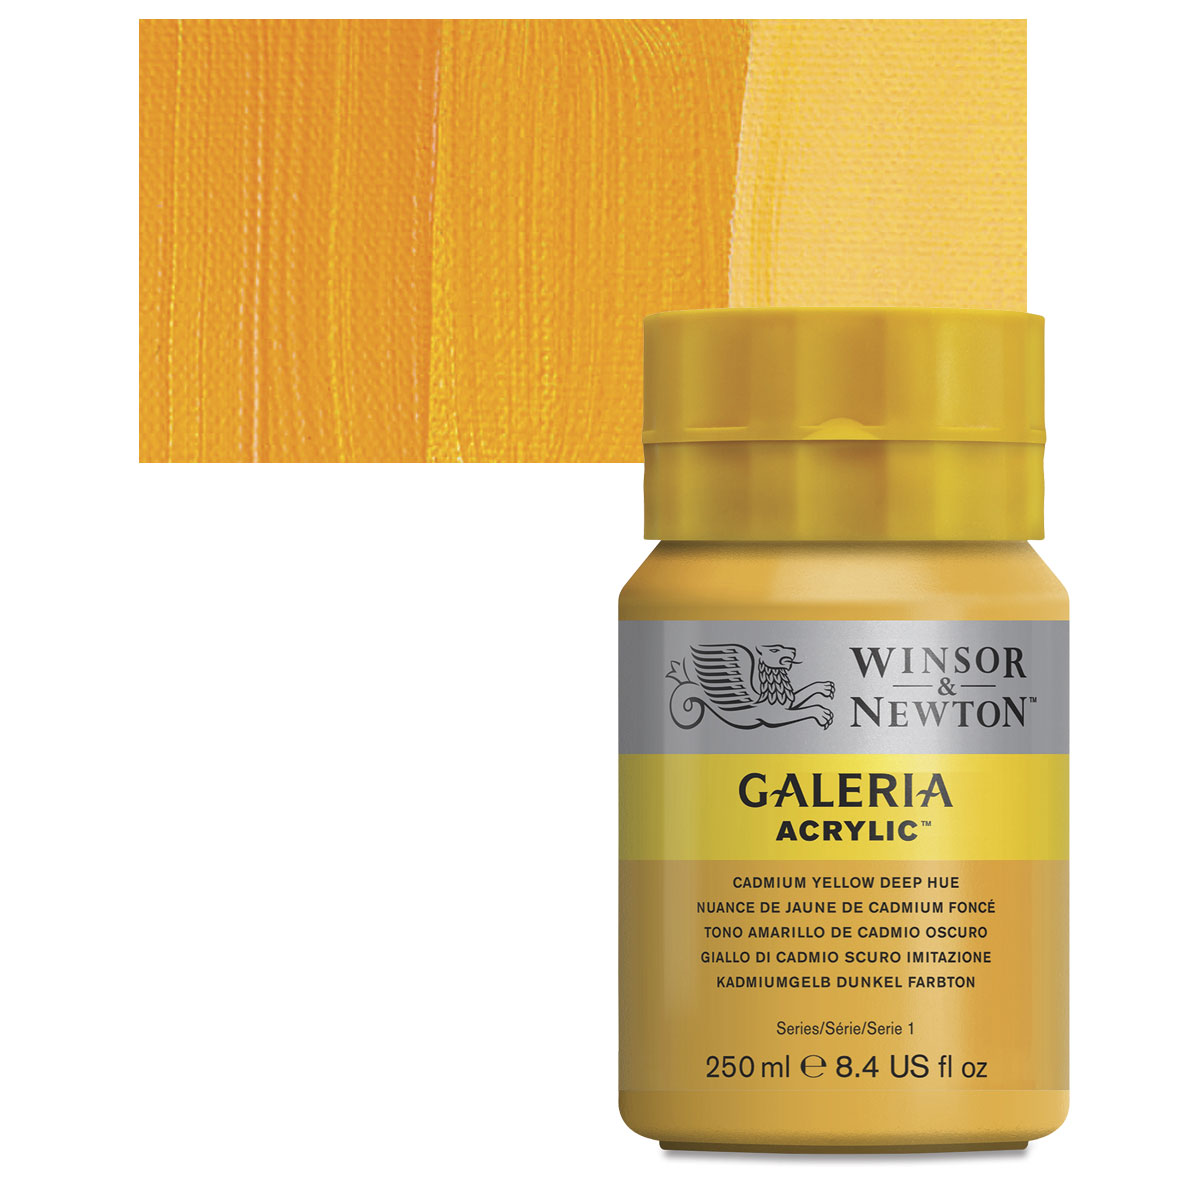 Winsor & Newton Galeria Acrylic Paints and Sets